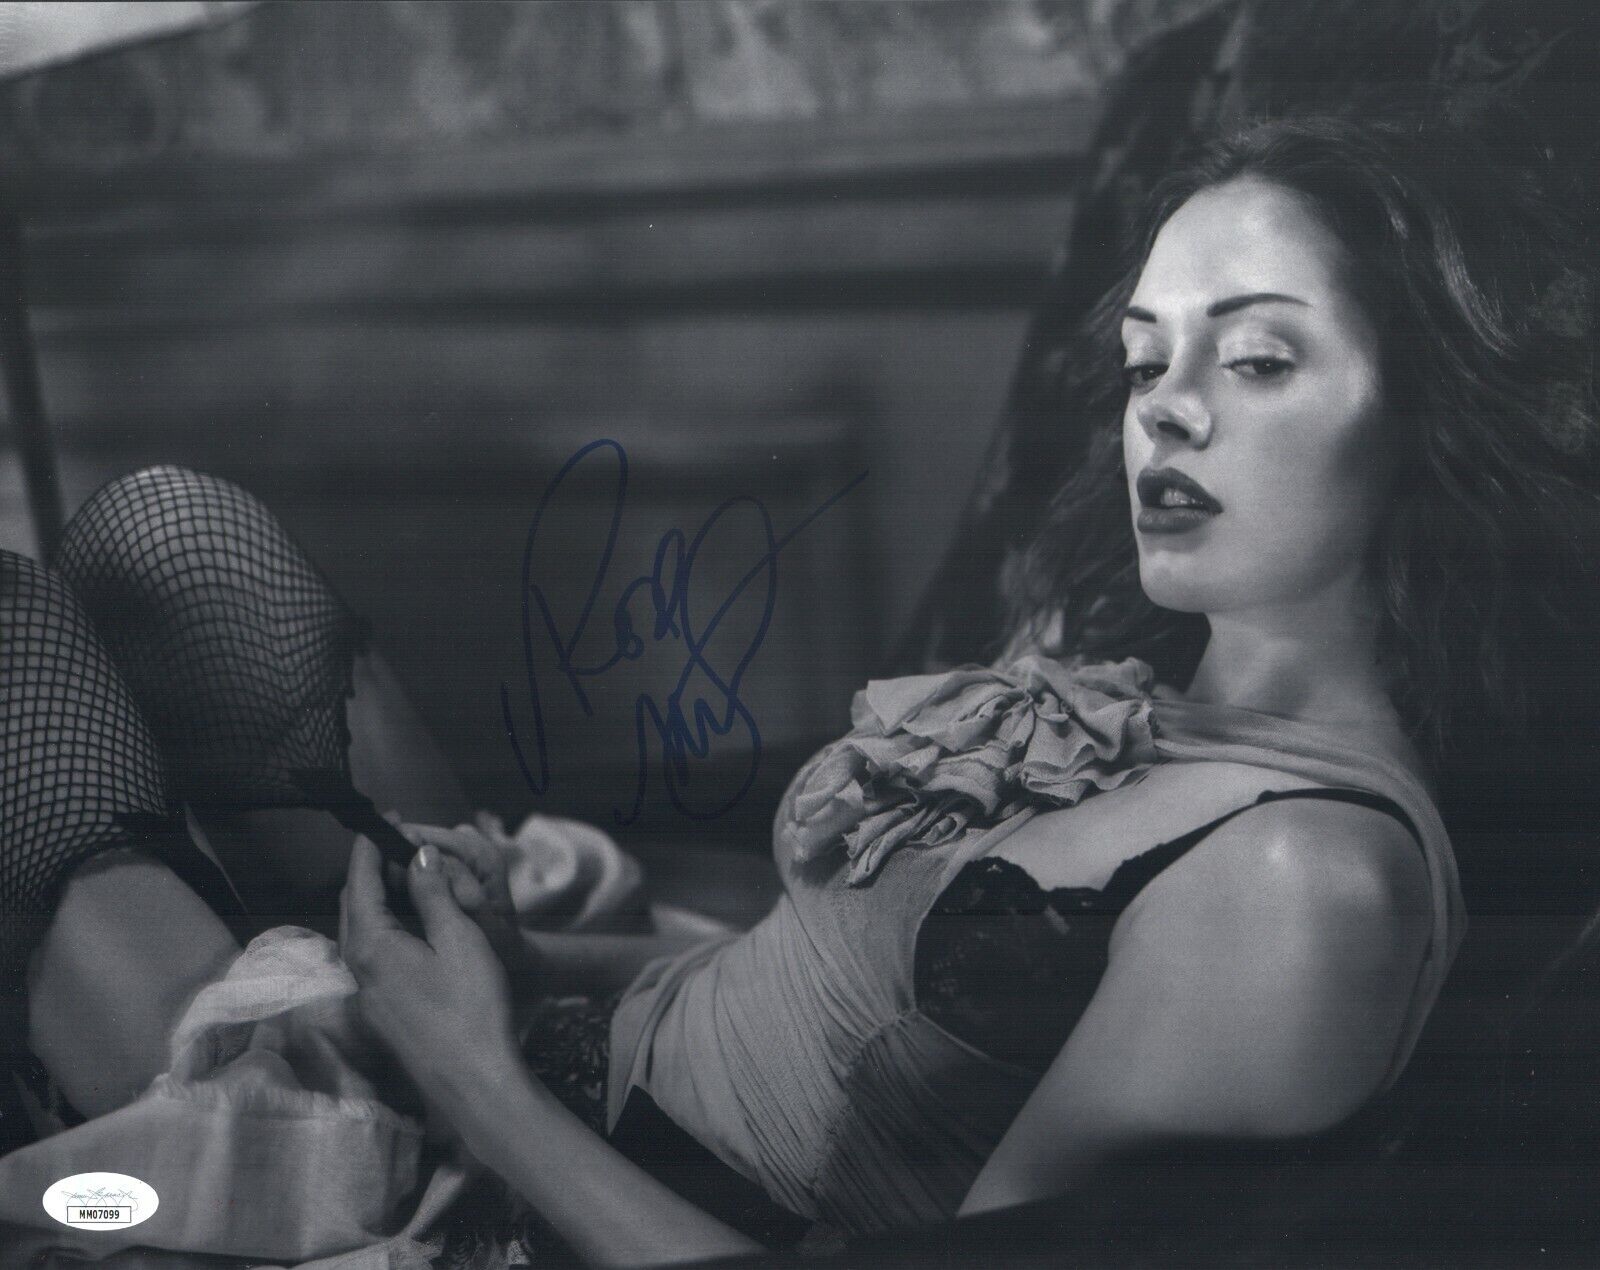 ROSE MCGOWAN Signed 11x14 Photo Poster painting In-Person Authentic Autograph JSA COA CERT